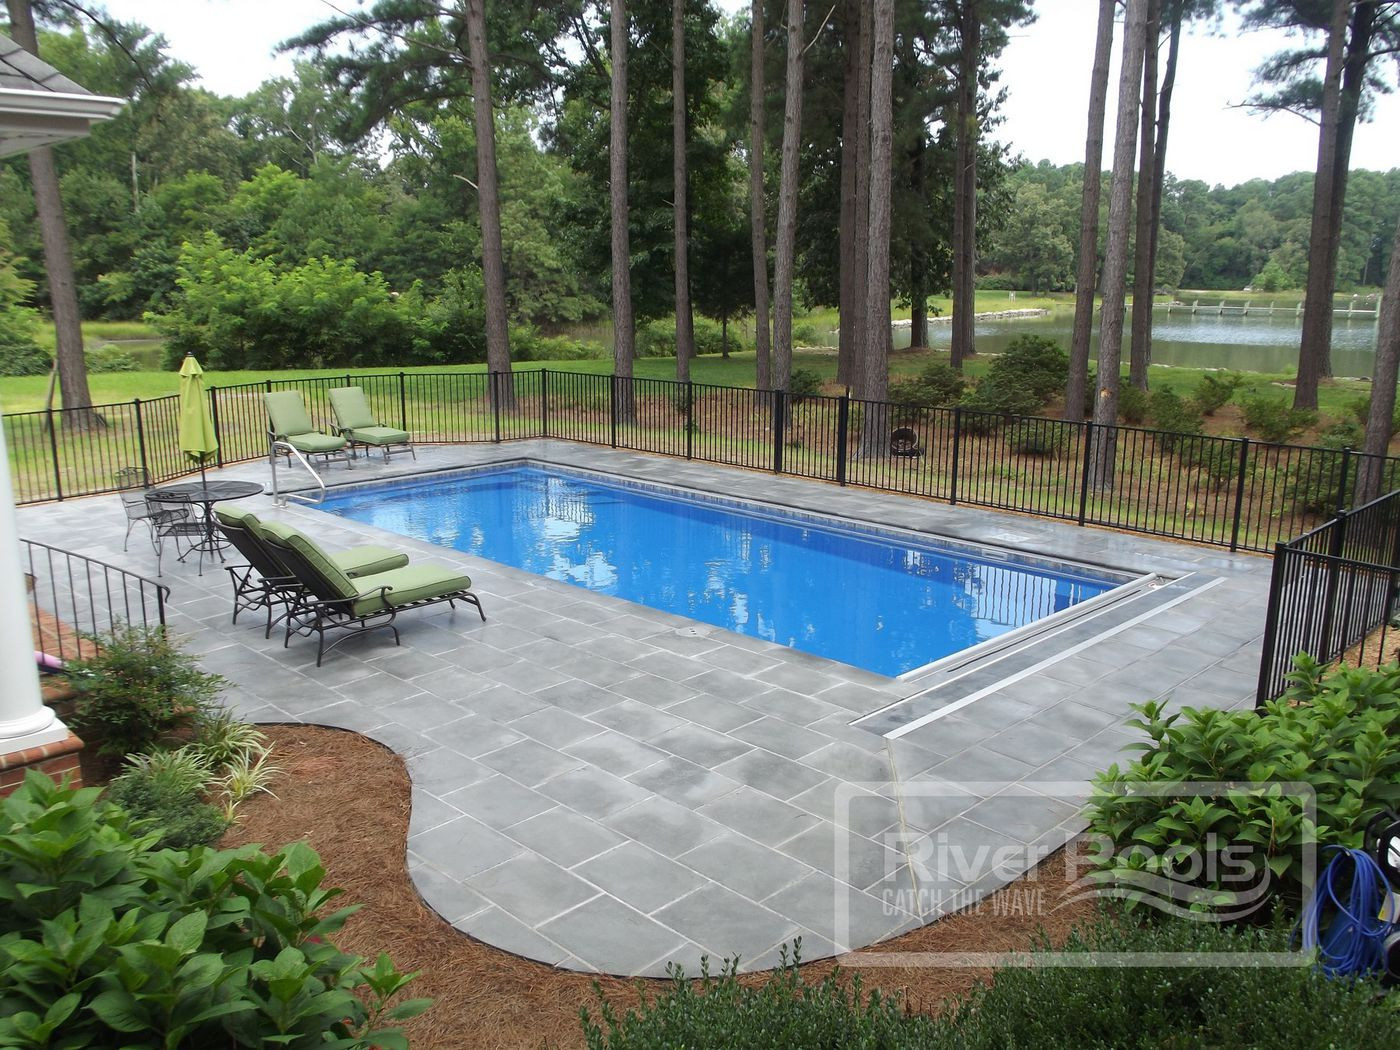 Pool In Small Backyard
 What is the Best Small Pool Design for a Small Yard